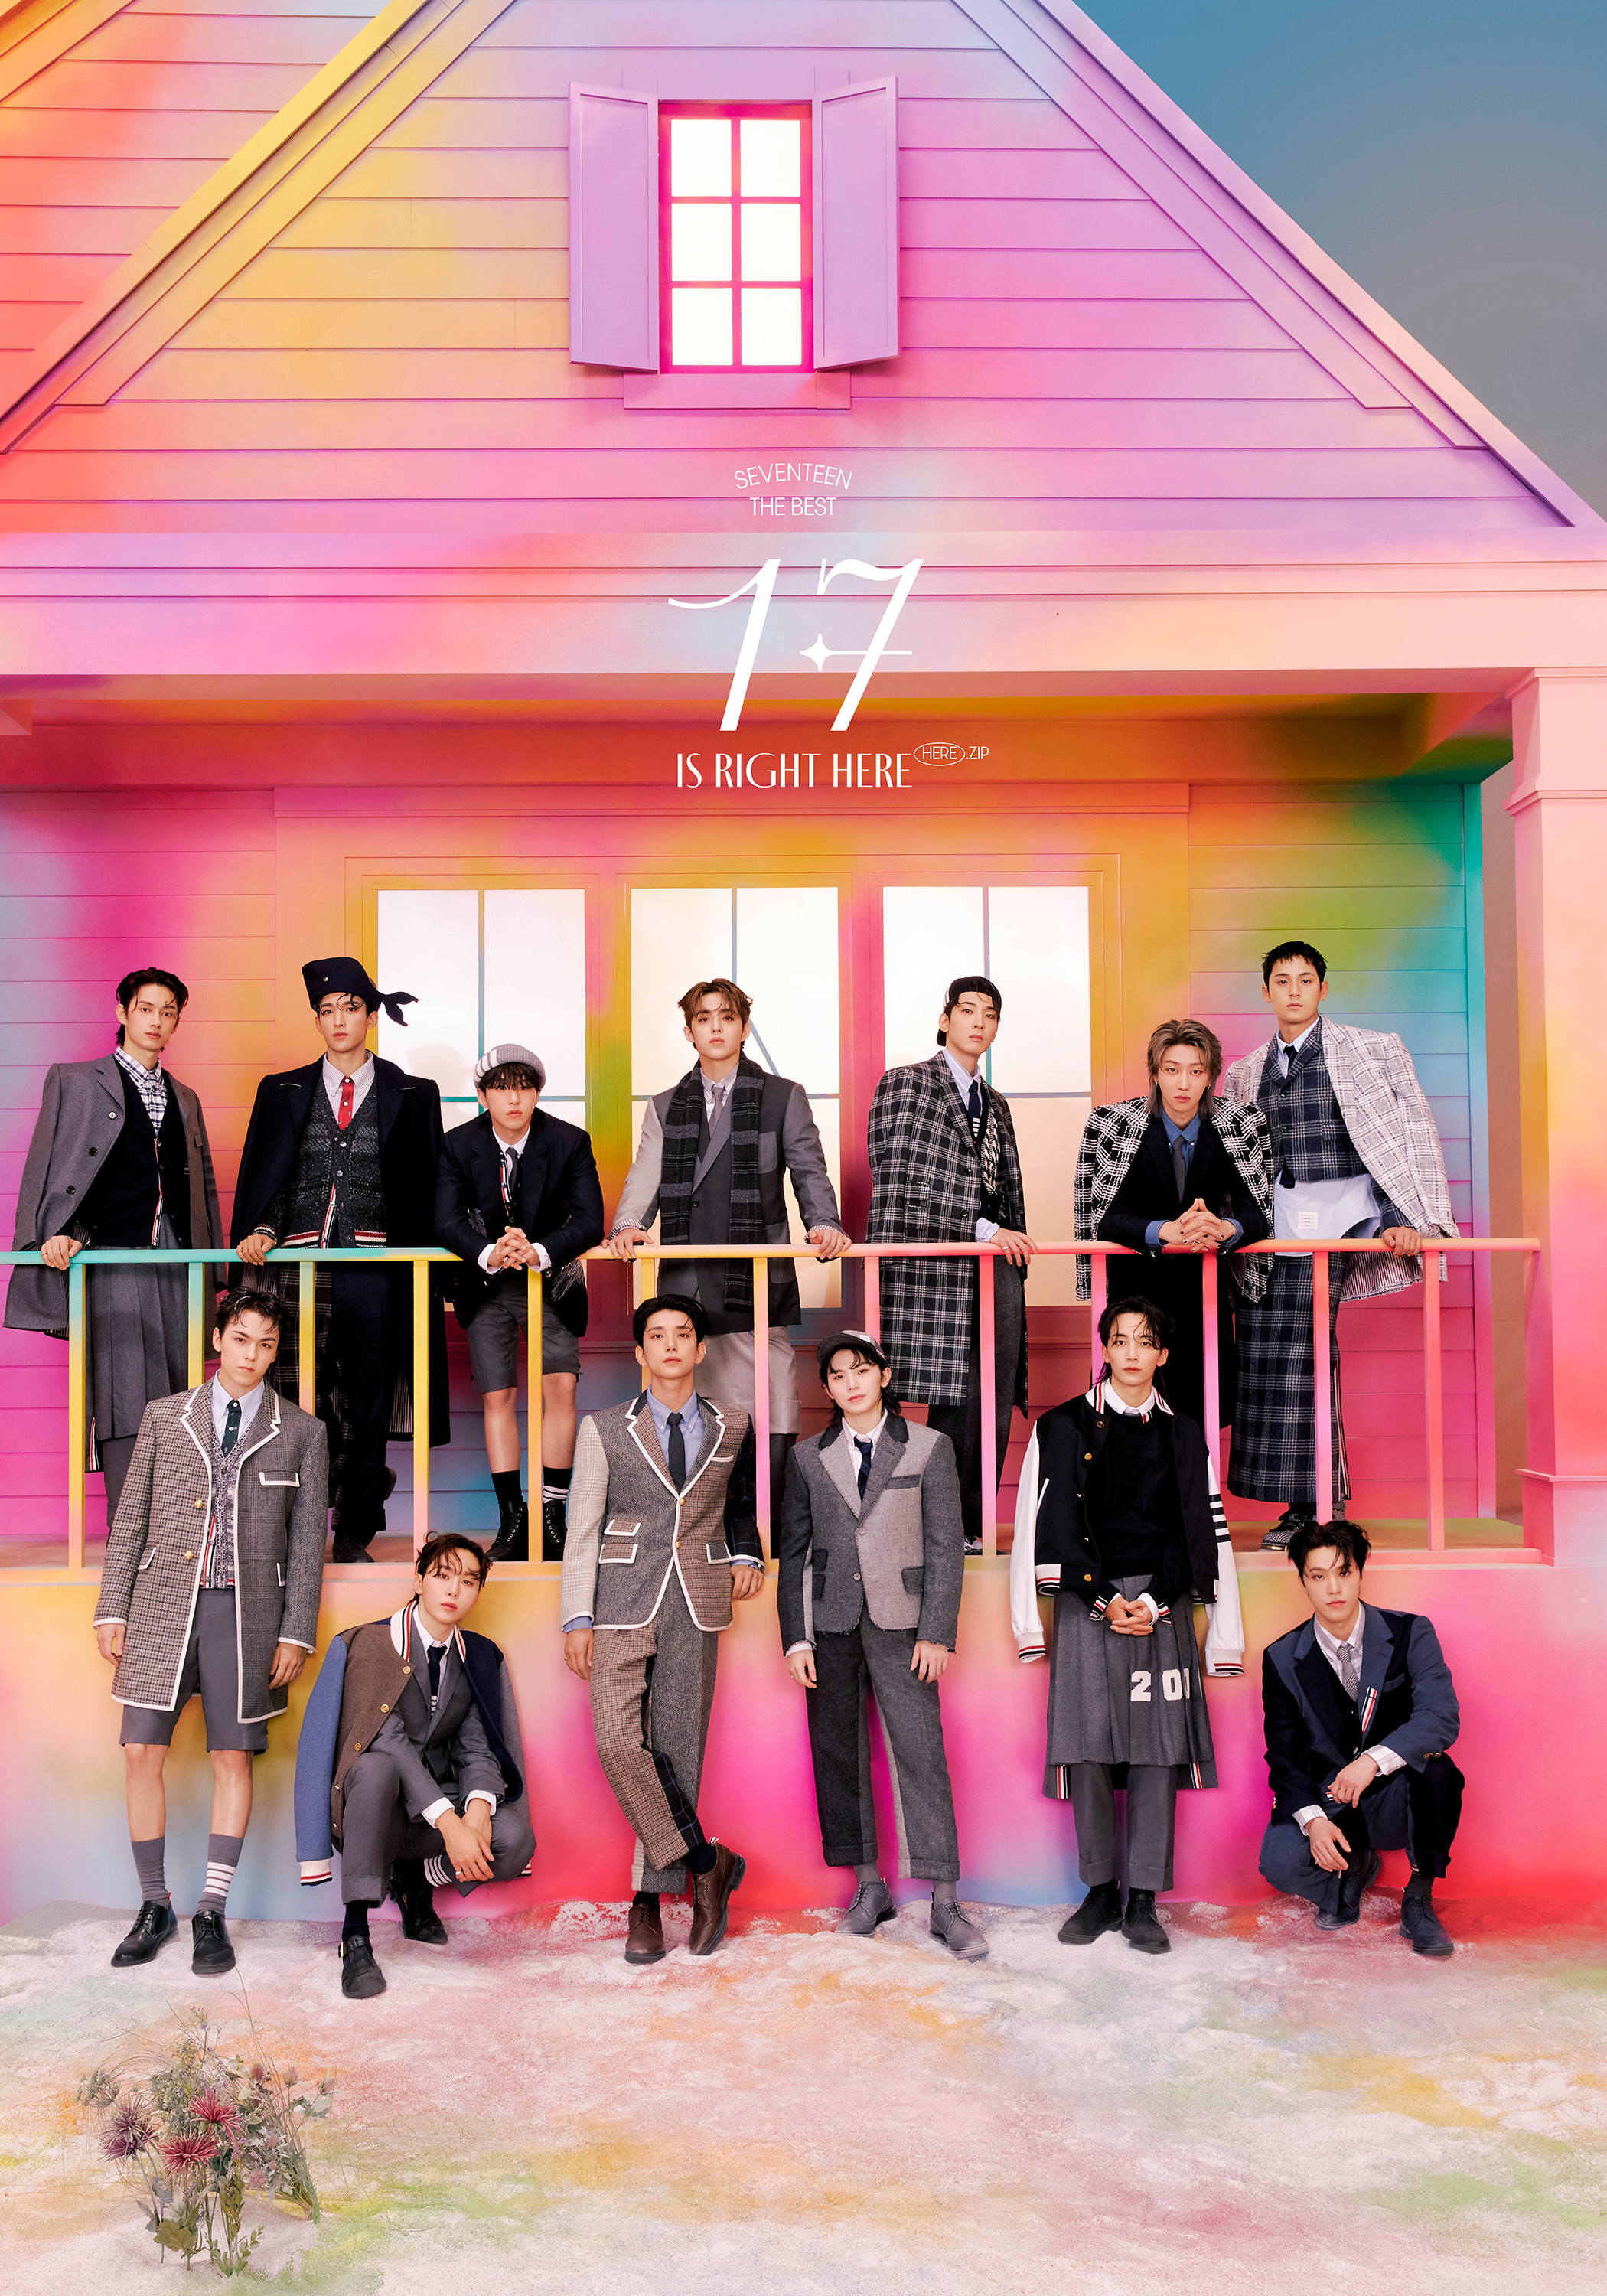 SEVENTEEN (세븐틴) BEST ALBUM '17 IS RIGHT HERE' Official Photo 